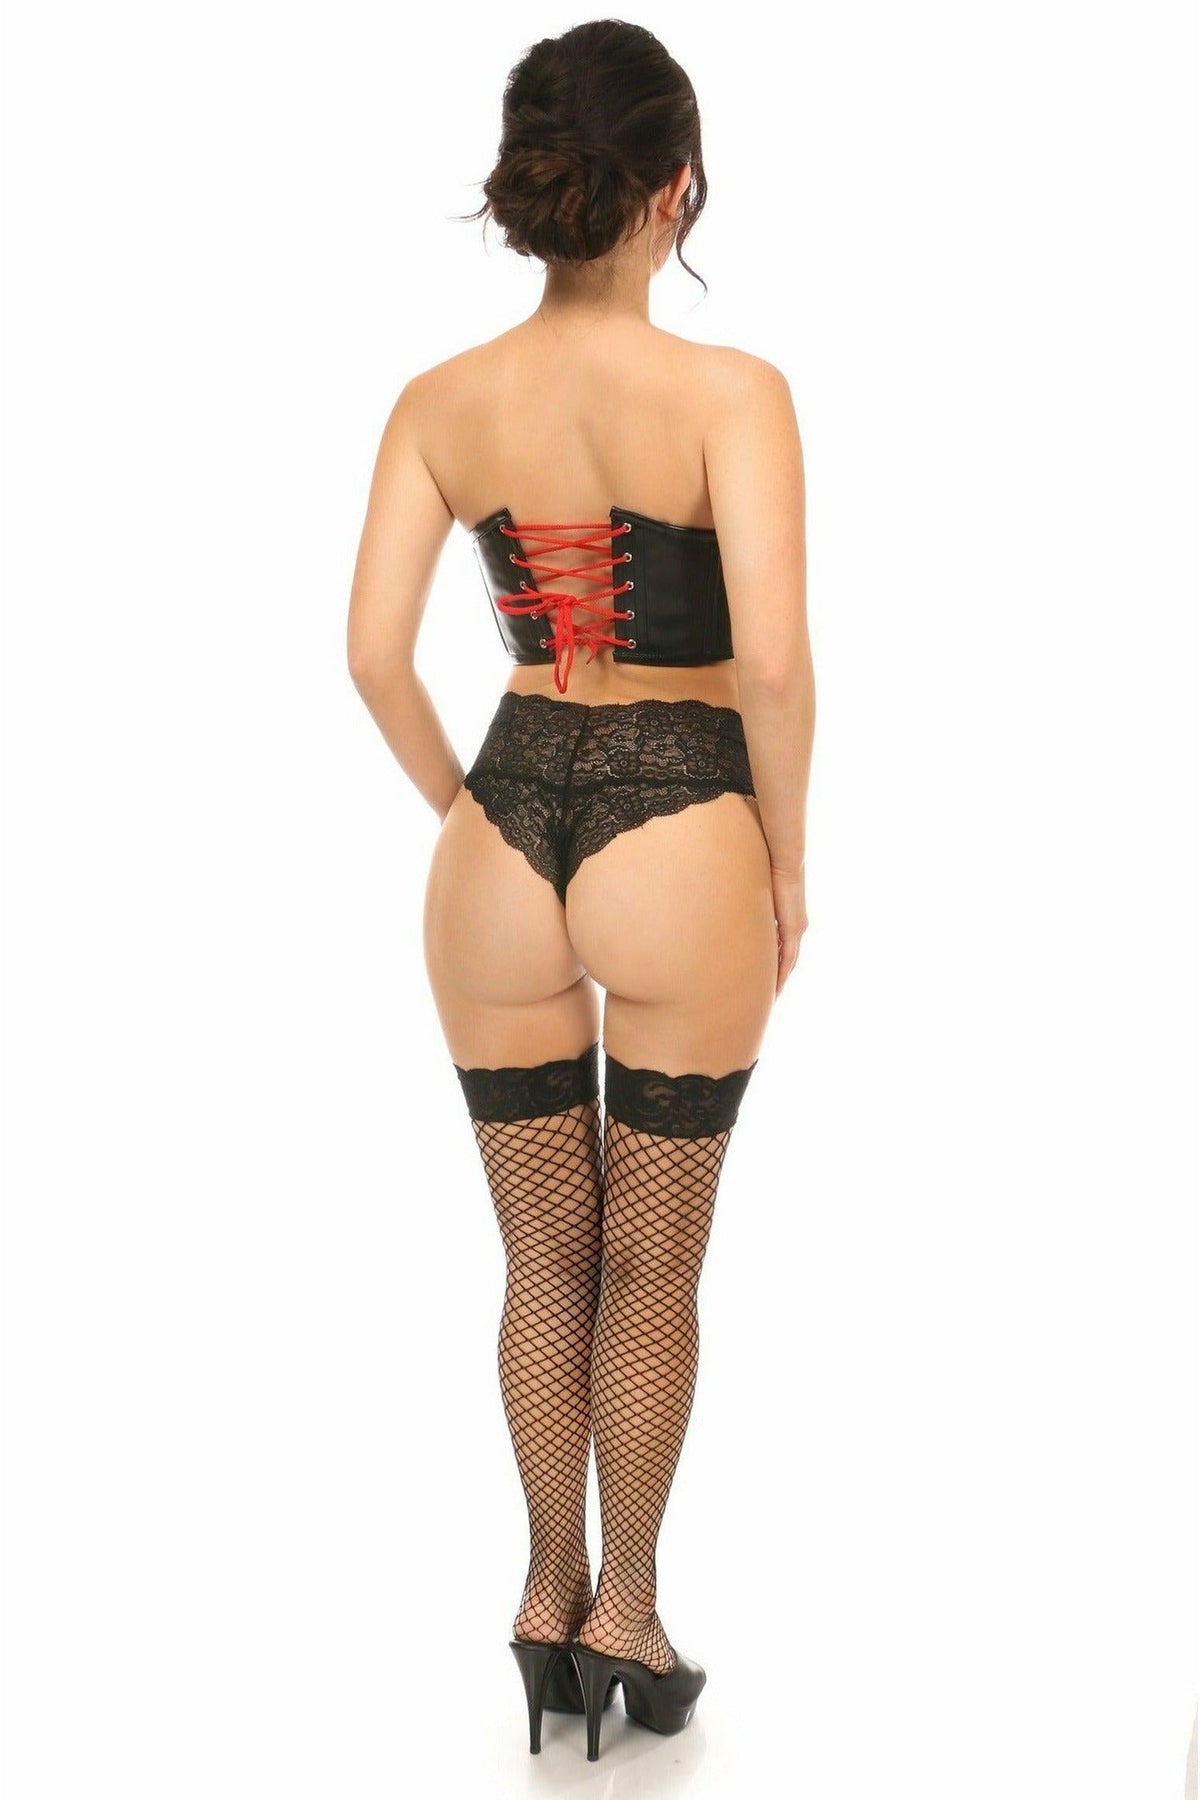 Lavish Black Faux Leather w/Red Lace-Up Bustier-Daisy Corsets